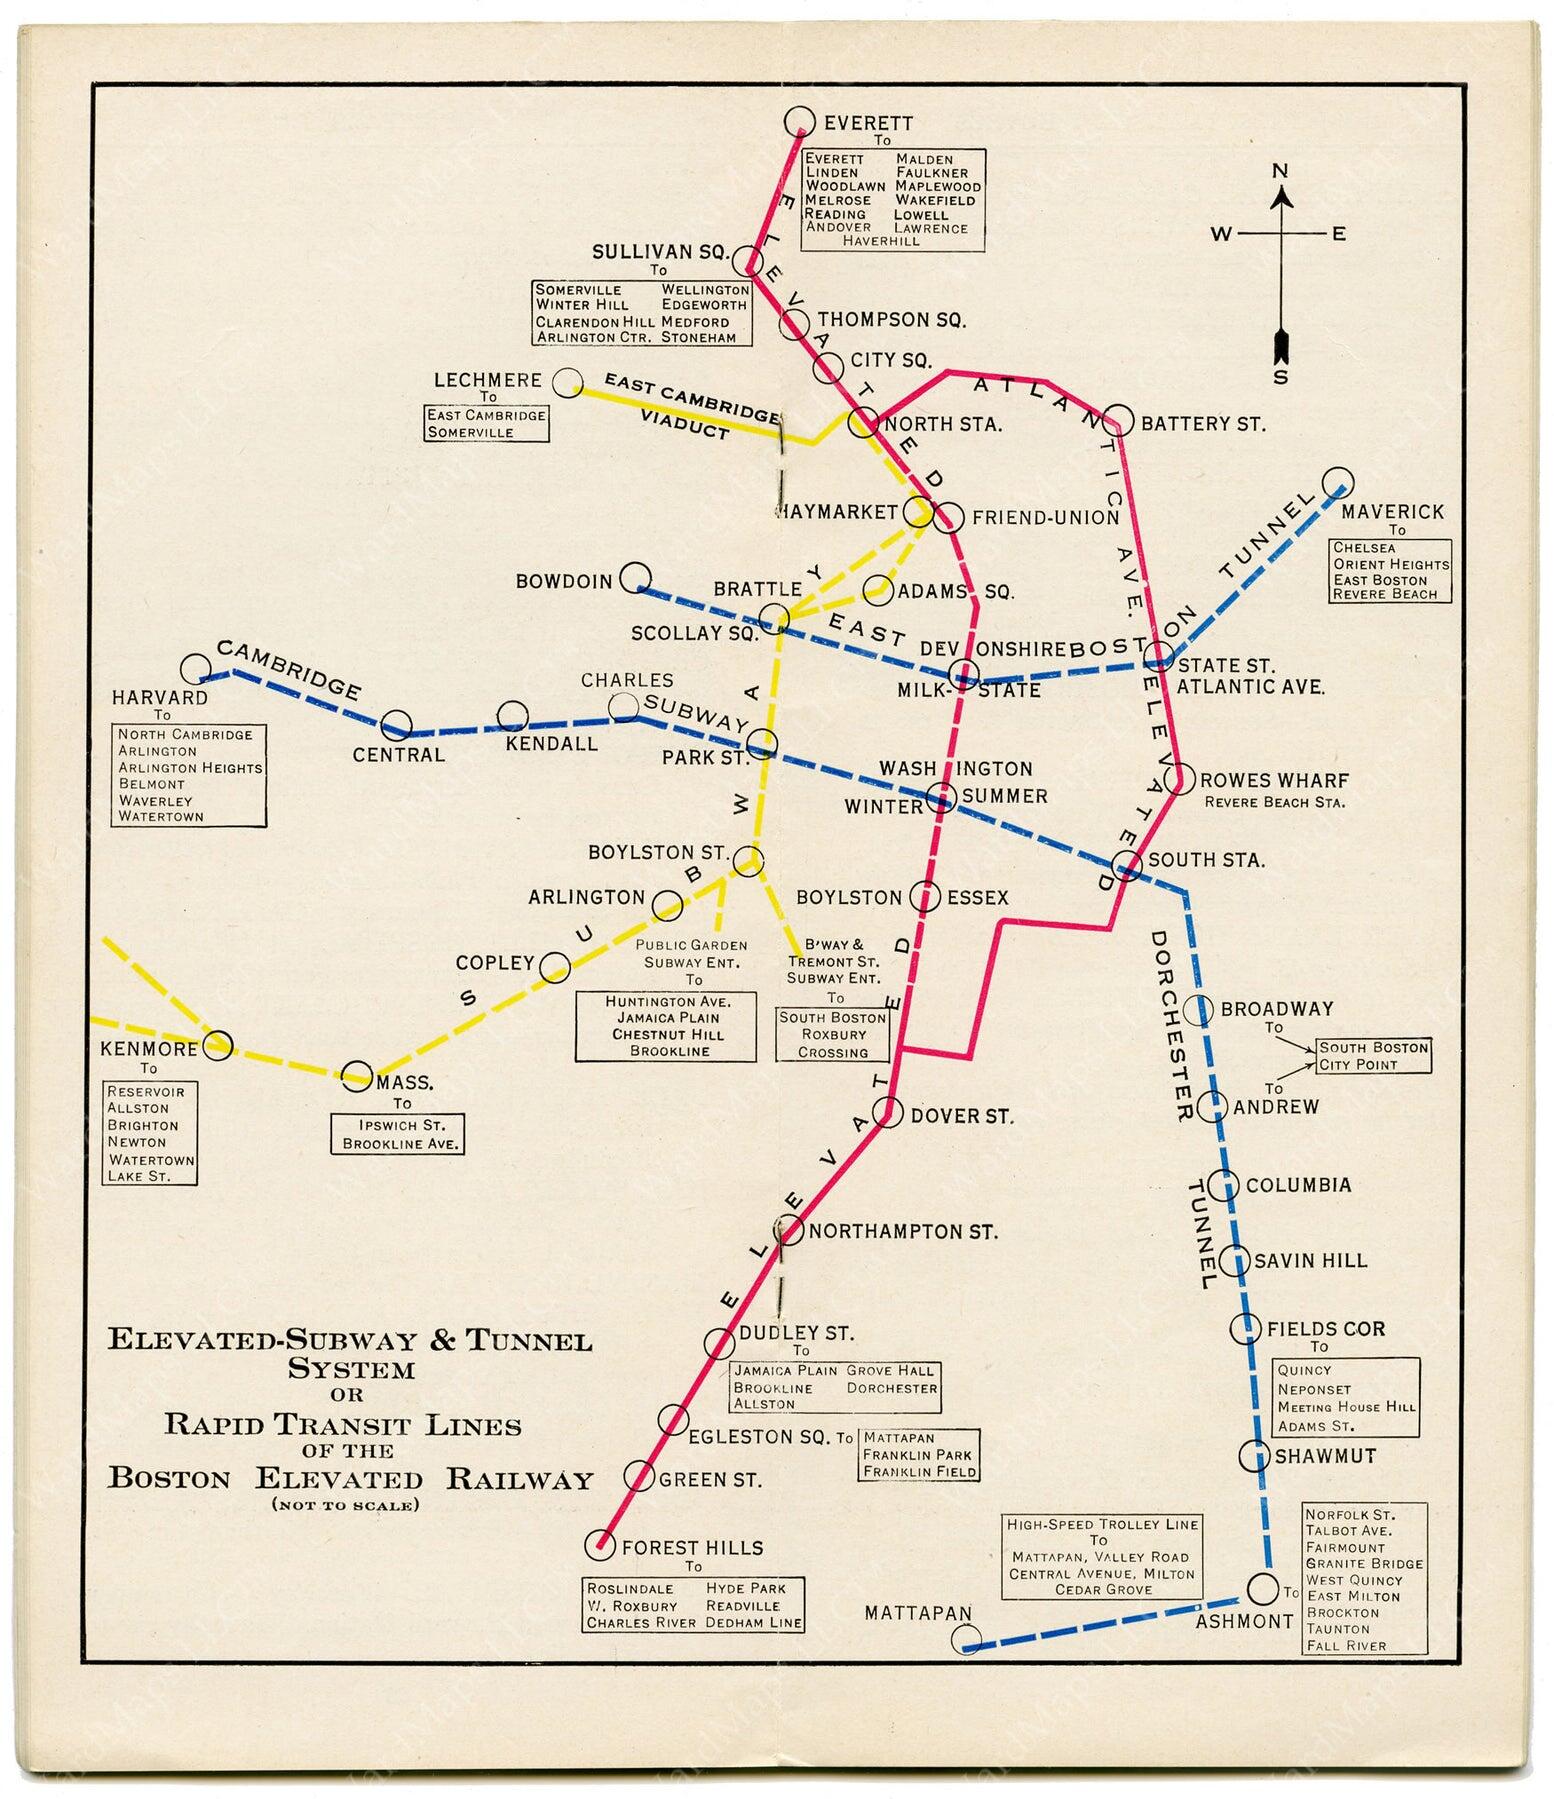 This 1932 line map of the Boston Elevated Railway Company's elevated subway and tunnel system shows the rapid transit lines of Greater Boston from Everett at top to Forest Hills at bottom on one line (here in red), from Cambridge to Mattapan on a second line (in blue), from Bowdoin to Maverick on a third line (also blue), from Lechmere to Kenmore on a fourth line (in yellow). Colors do not match modern line colors. 